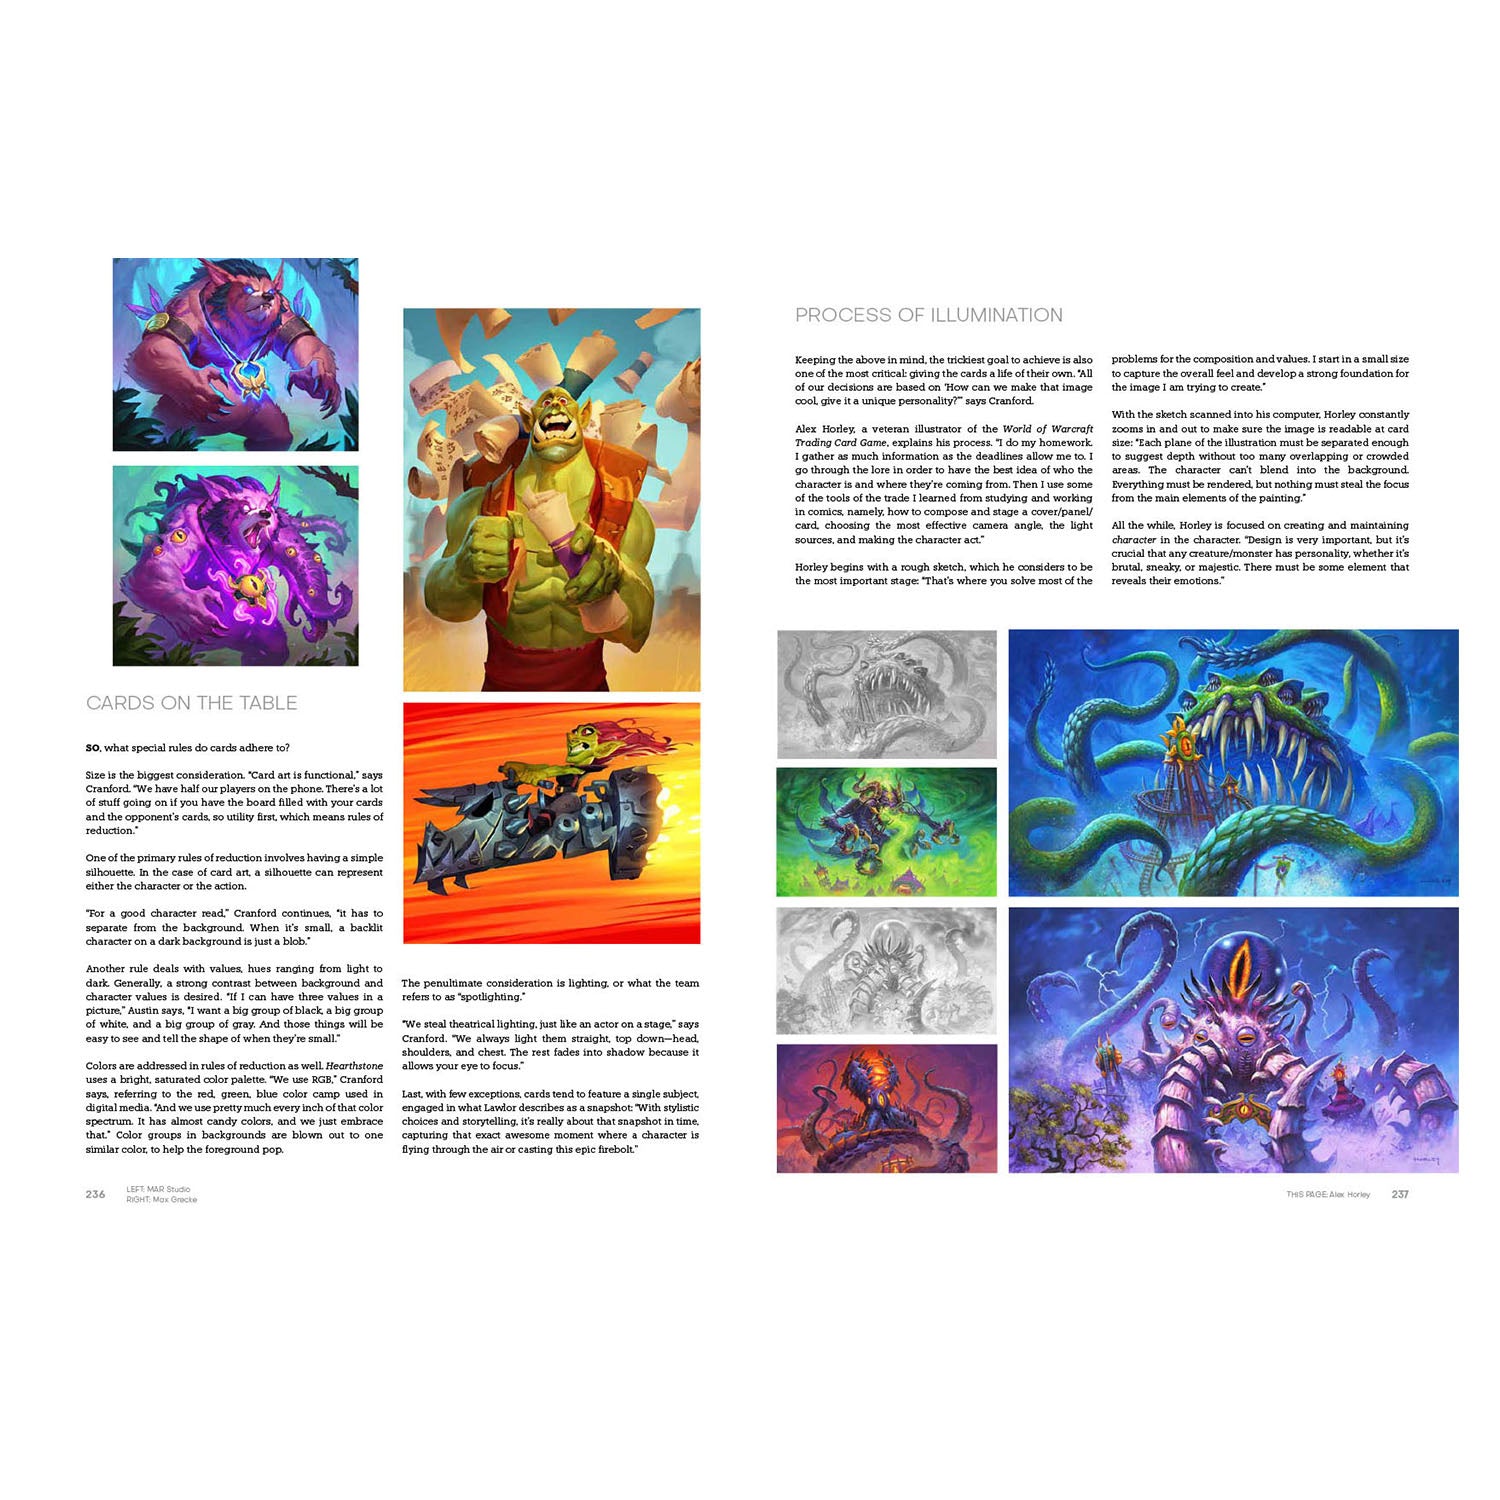 Blizzard Entertainment: Forging Worlds - Stories Behind the Art of Blizzard Entertainment in Blue - First Page View